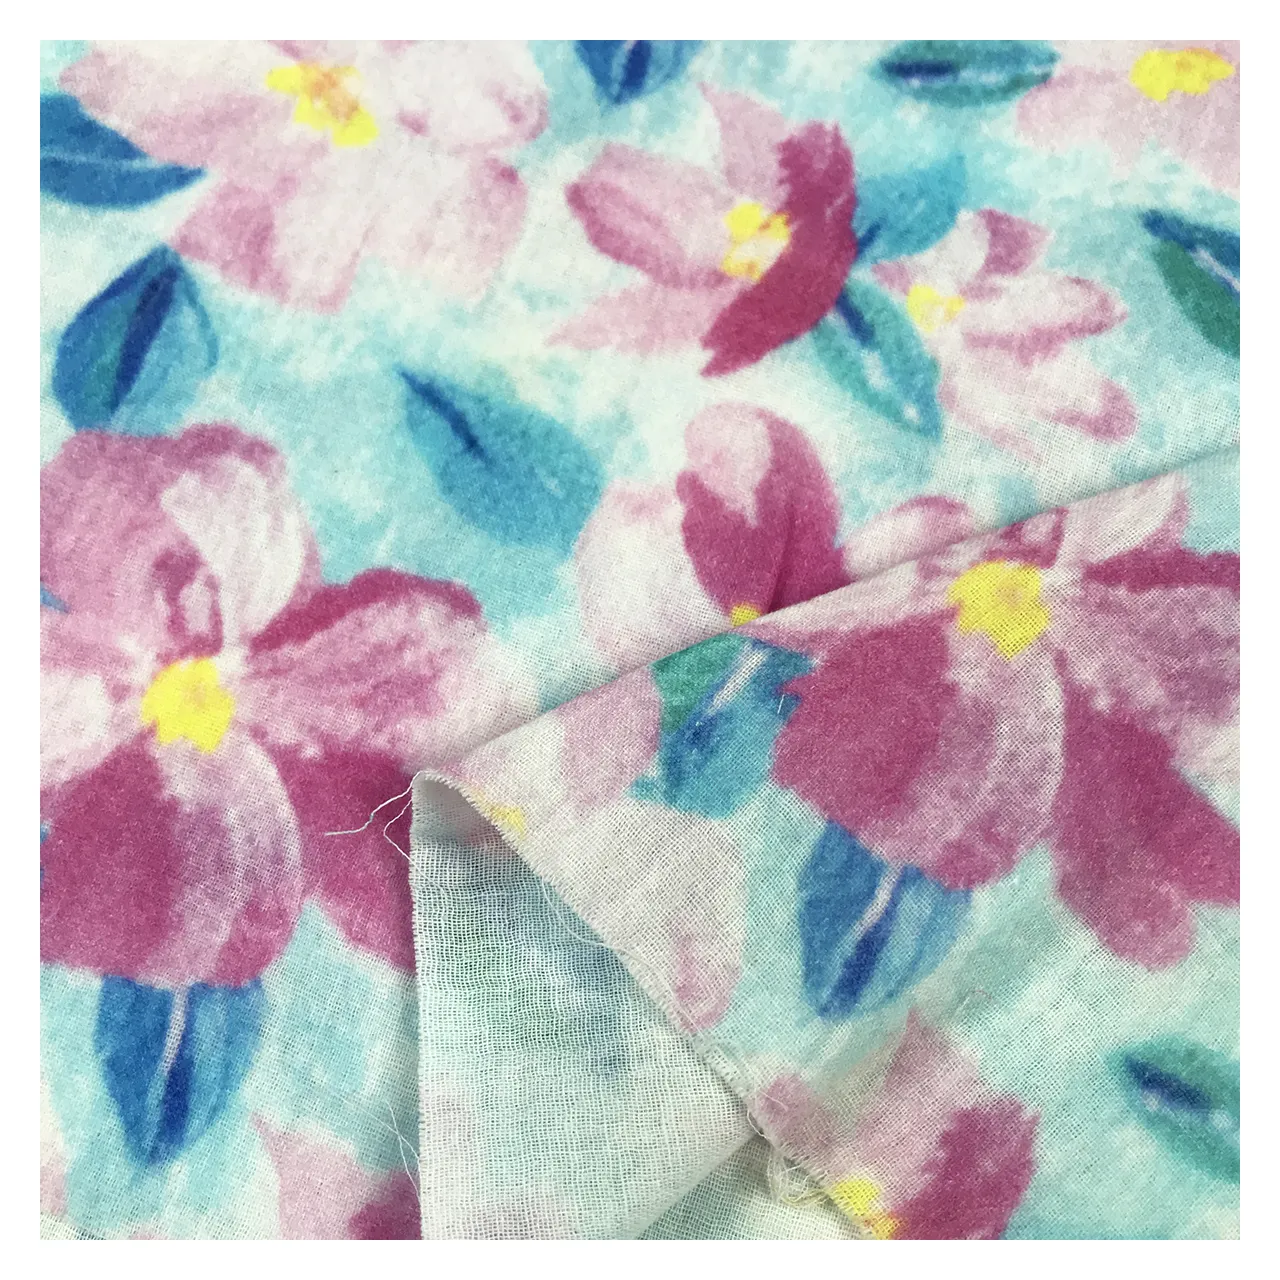 The factory outlet vibrant flowers design natural very soft customize cotton double gauze fabric printed for baby clothing